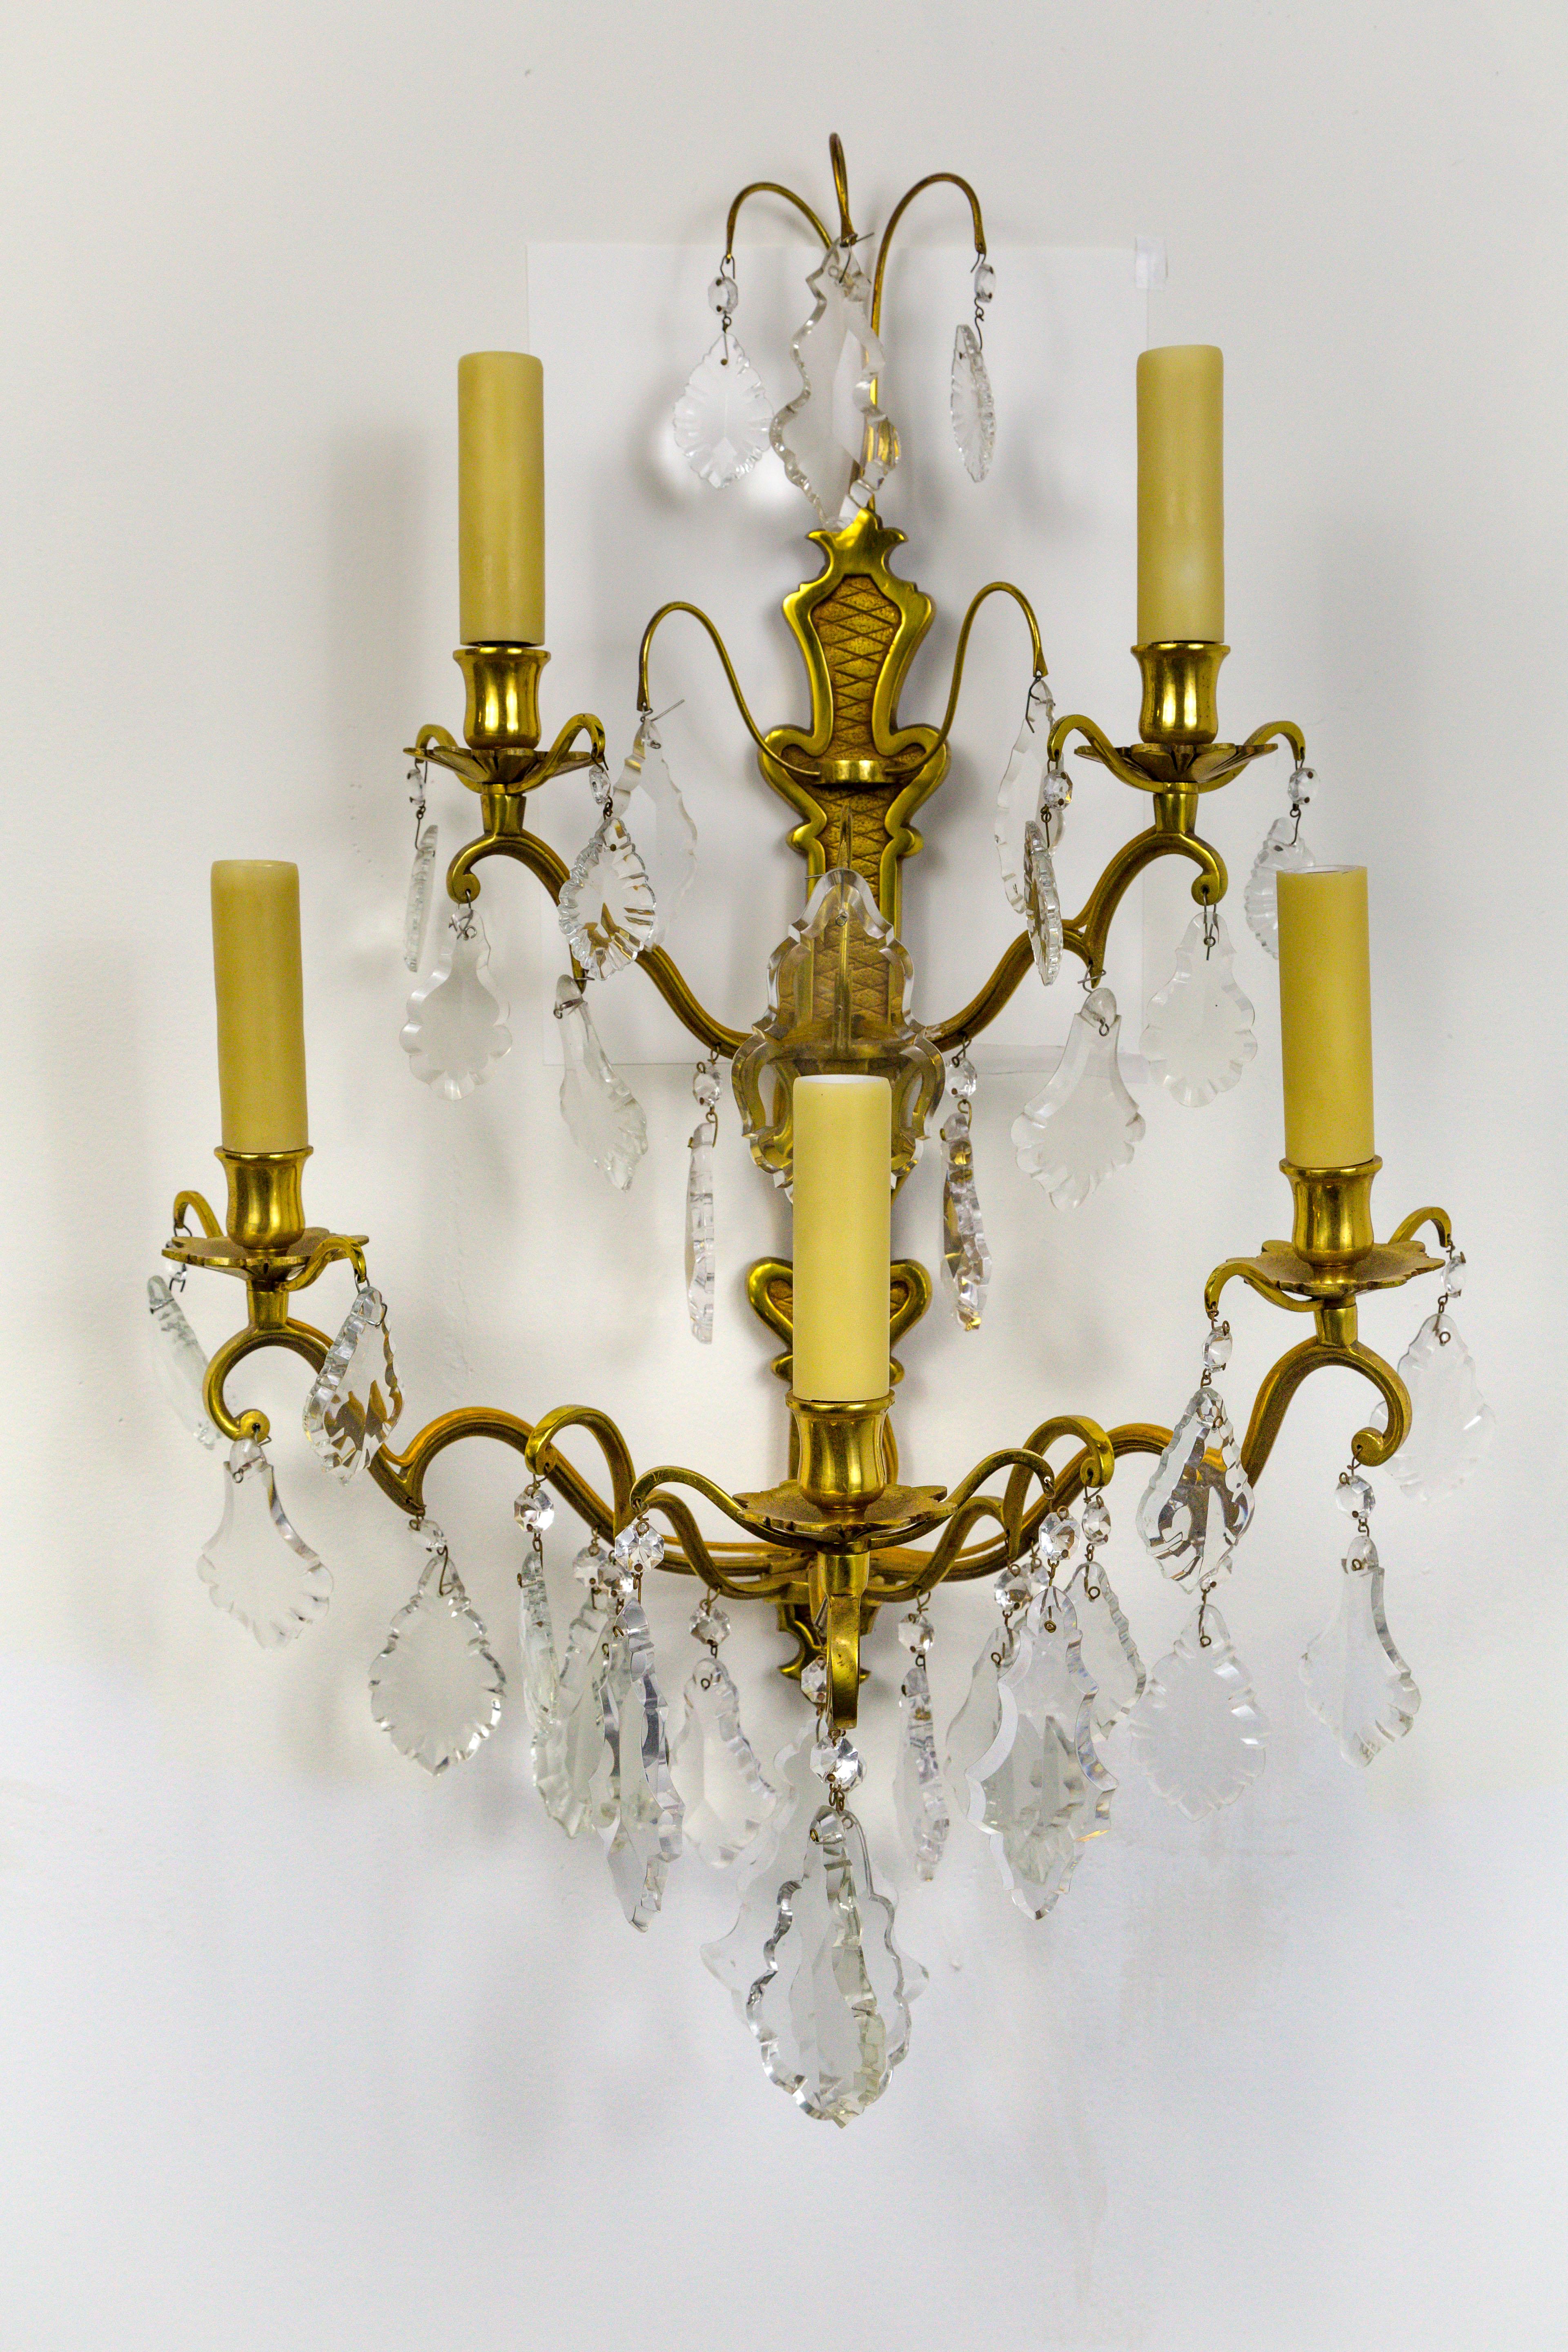 A lovely pair of French gilded bronze, double tier, five-arm, candelabra sconces in the Belle Époque style. With heavy, French pendalogue crystals, and polybeeswax candle covers, circa 1910.
Newly rewired. Measures: 17